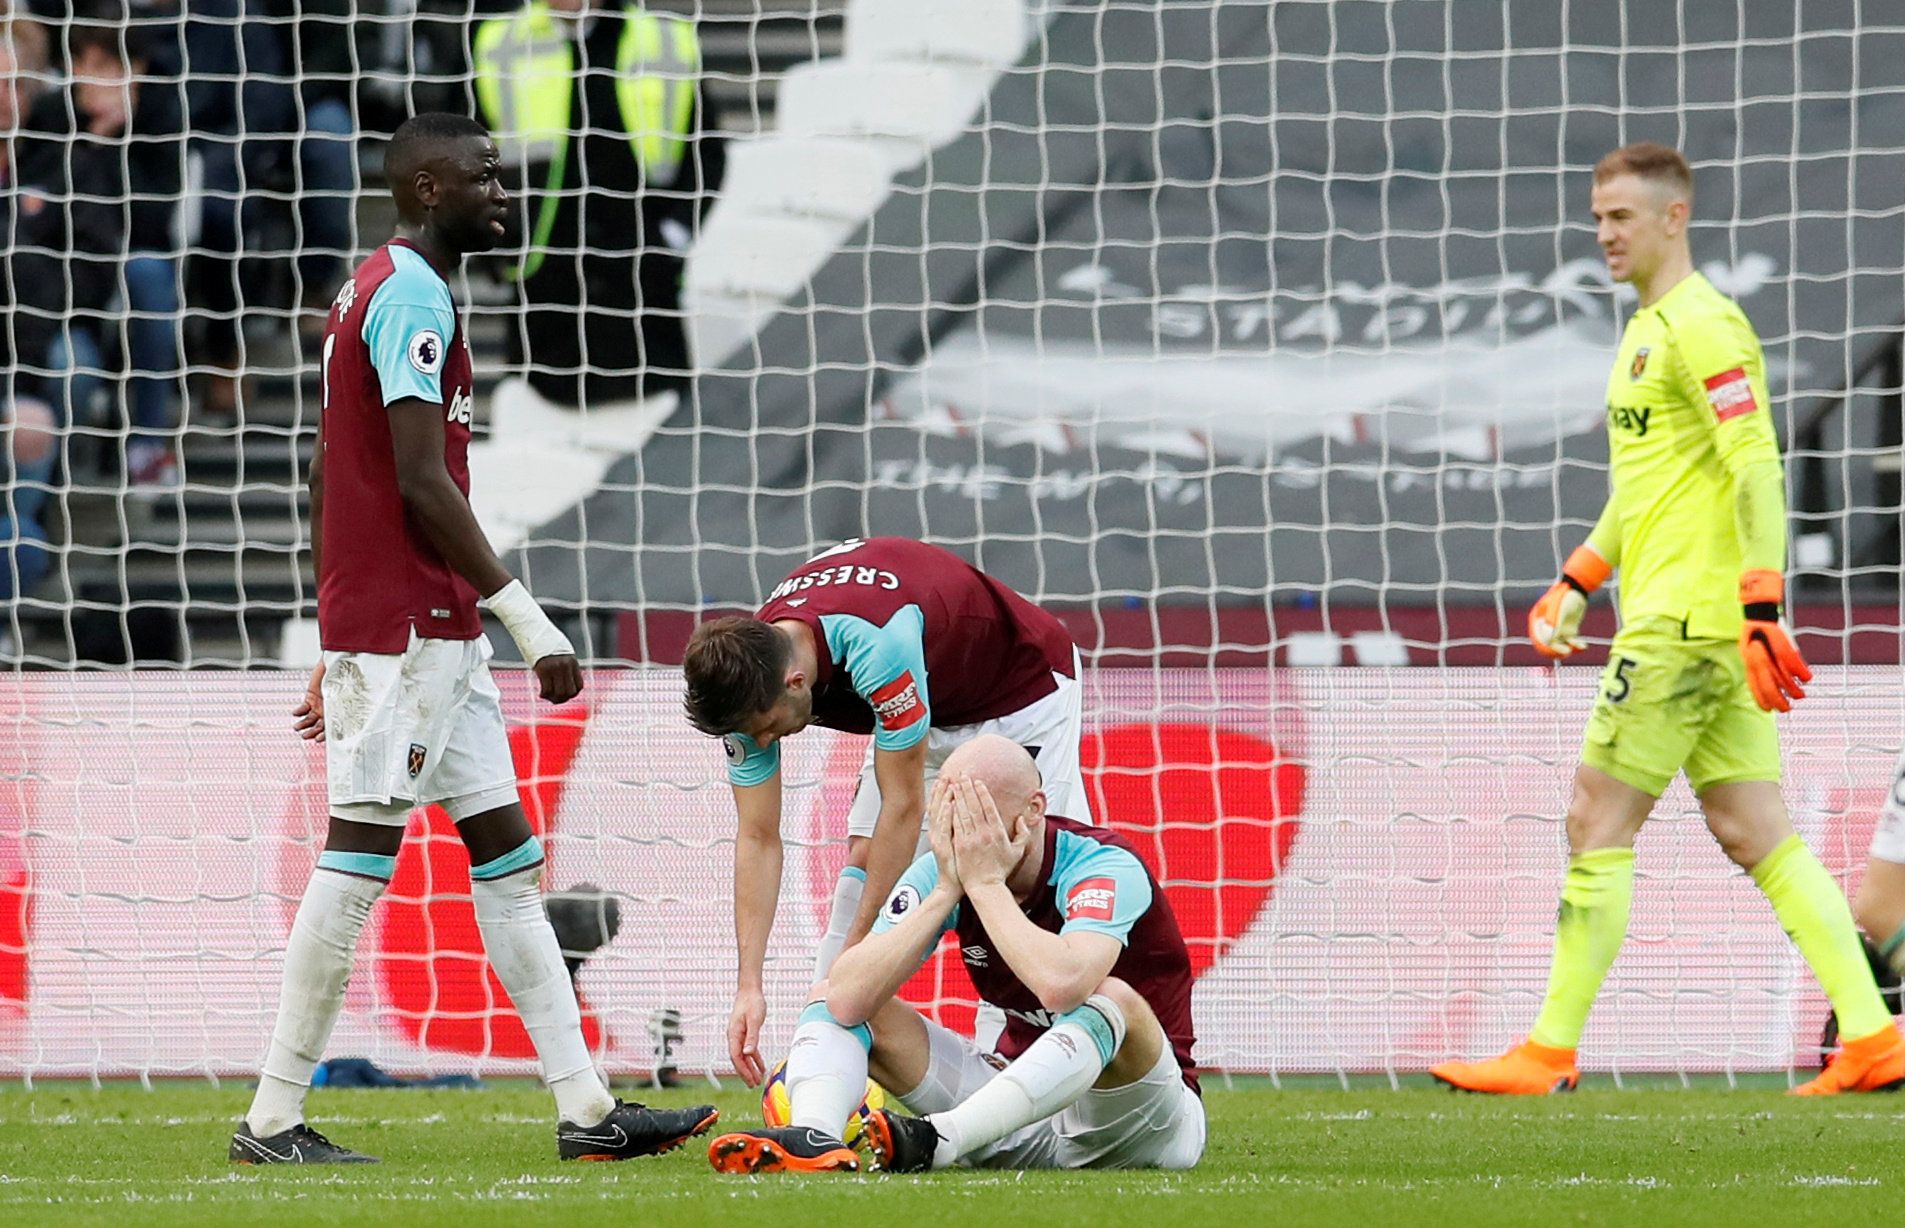 Soccer Football - Premier League - West Ham United vs Burnley - London Stadium, London, Britain - March 10, 2018   West Ham United's James Collins and Cheikhou Kouyate look dejected after a Burnley goal   REUTERS/David Klein    EDITORIAL USE ONLY. No use with unauthorized audio, video, data, fixture lists, club/league logos or 